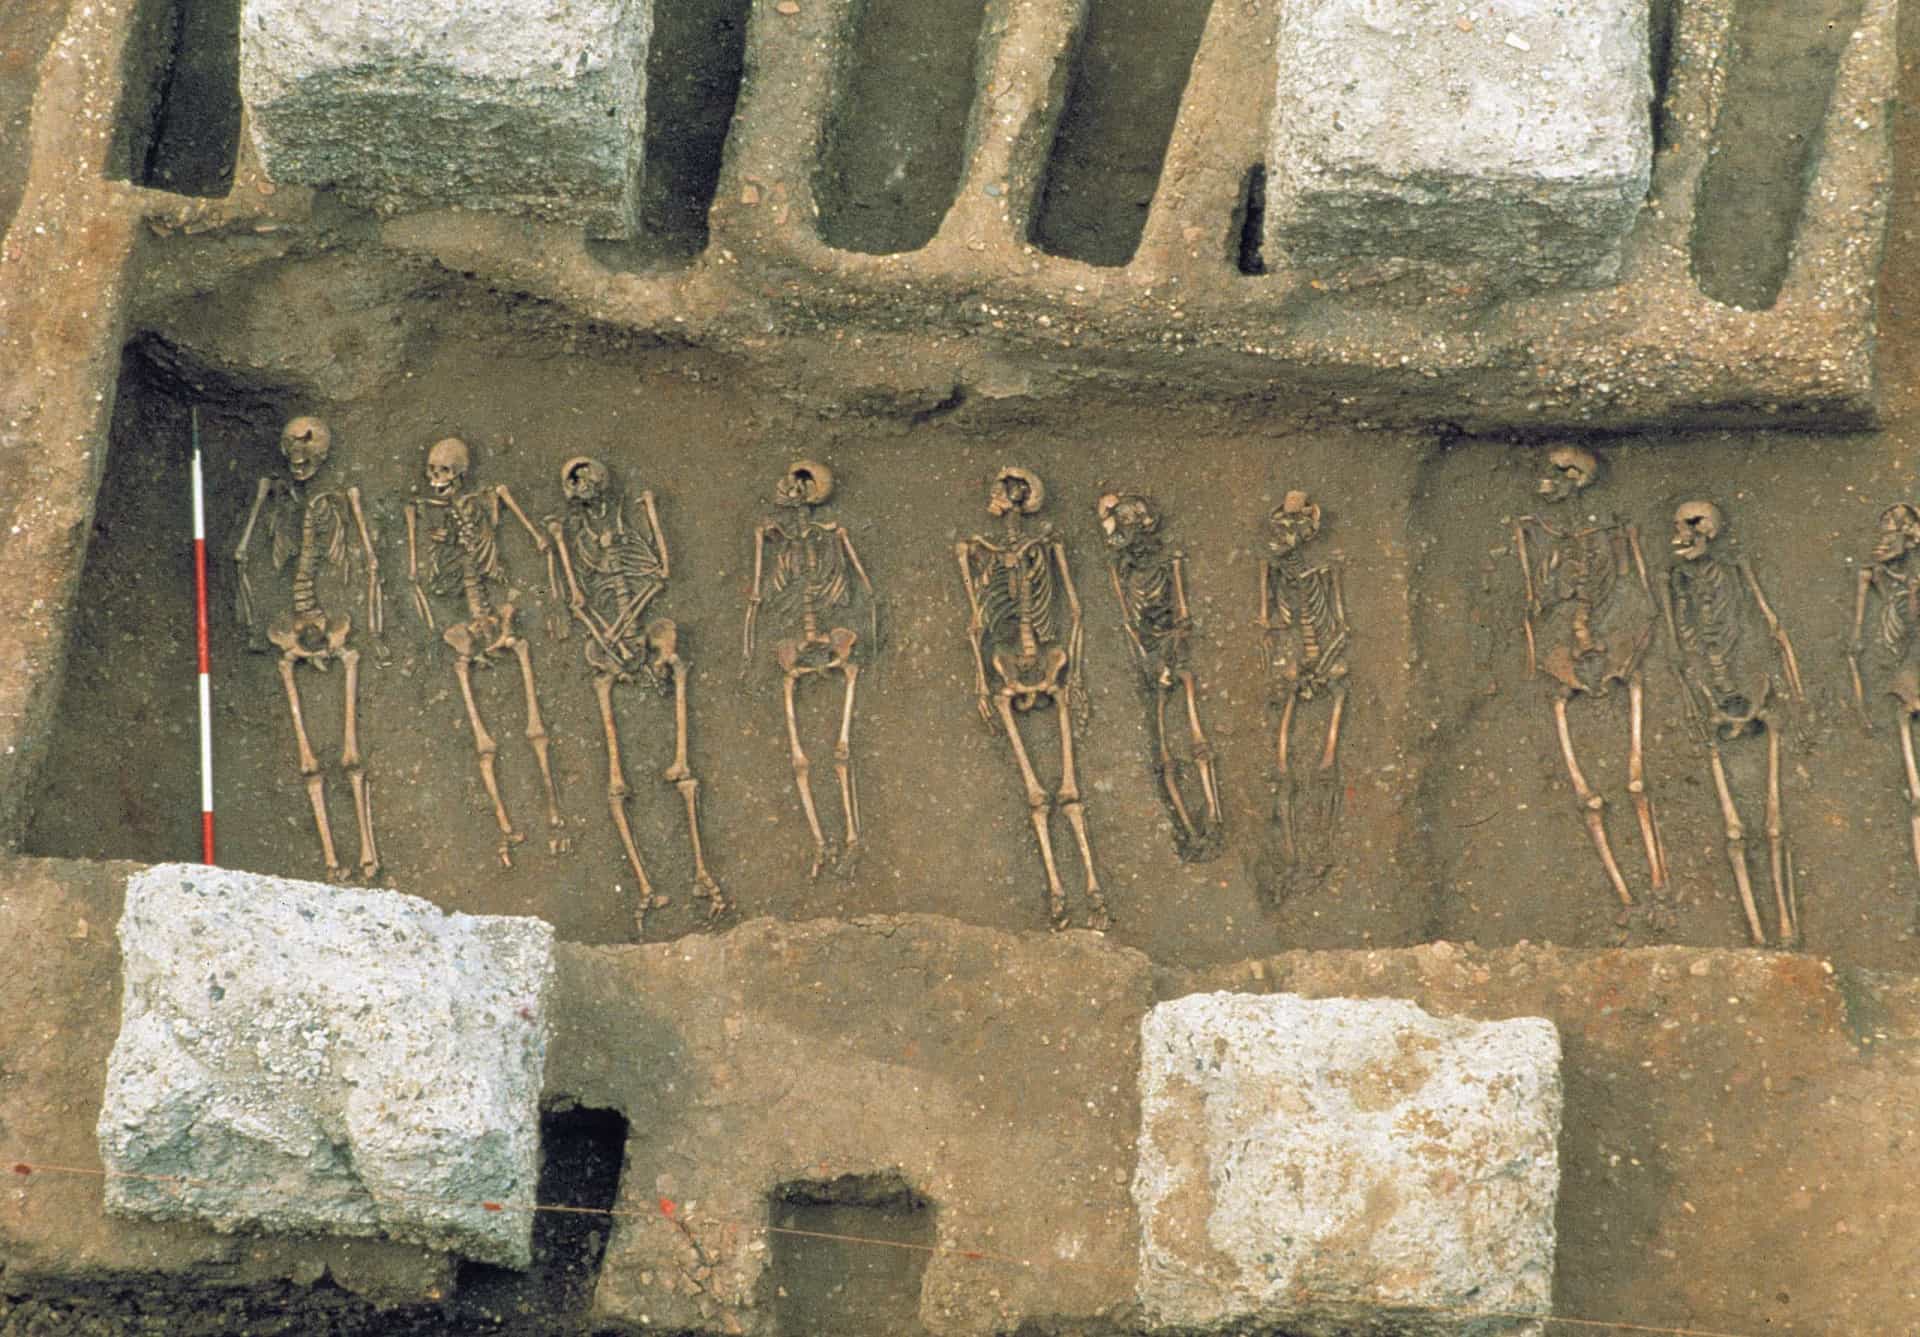 <p>During the same excavation, another grave was discovered where the victims were not simply thrown into a mass grave. Instead, they were arranged side by side, indicating that some level of respect was given to their burial and a typical burial method was followed.</p><p>You may also like:<a href="https://www.starsinsider.com/n/451104?utm_source=msn.com&utm_medium=display&utm_campaign=referral_description&utm_content=614622en-en"> Fascinating facts about Kensington Palace and its royal residents</a></p>